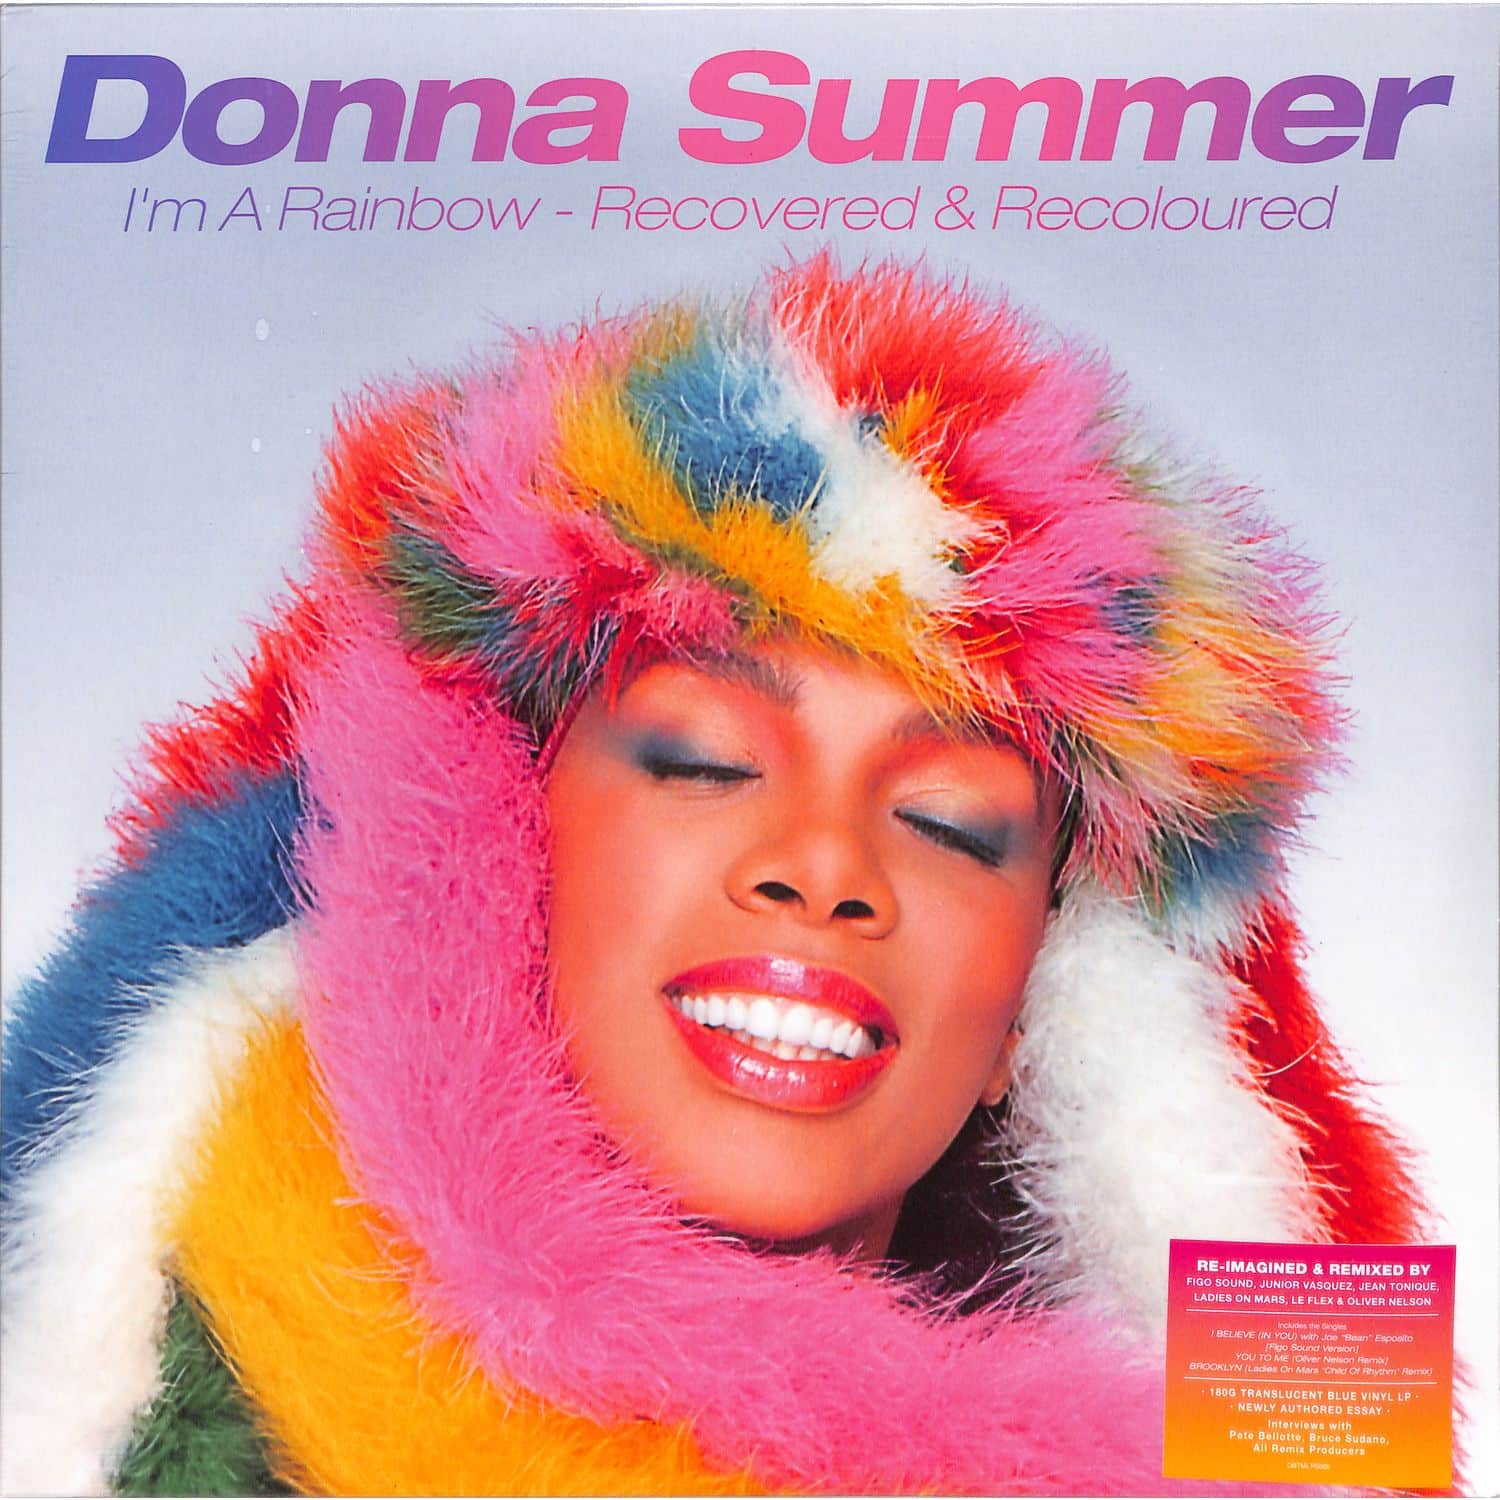 Donna Summer - I M A RAINBOW - RECOVERED & RECOLOURED 